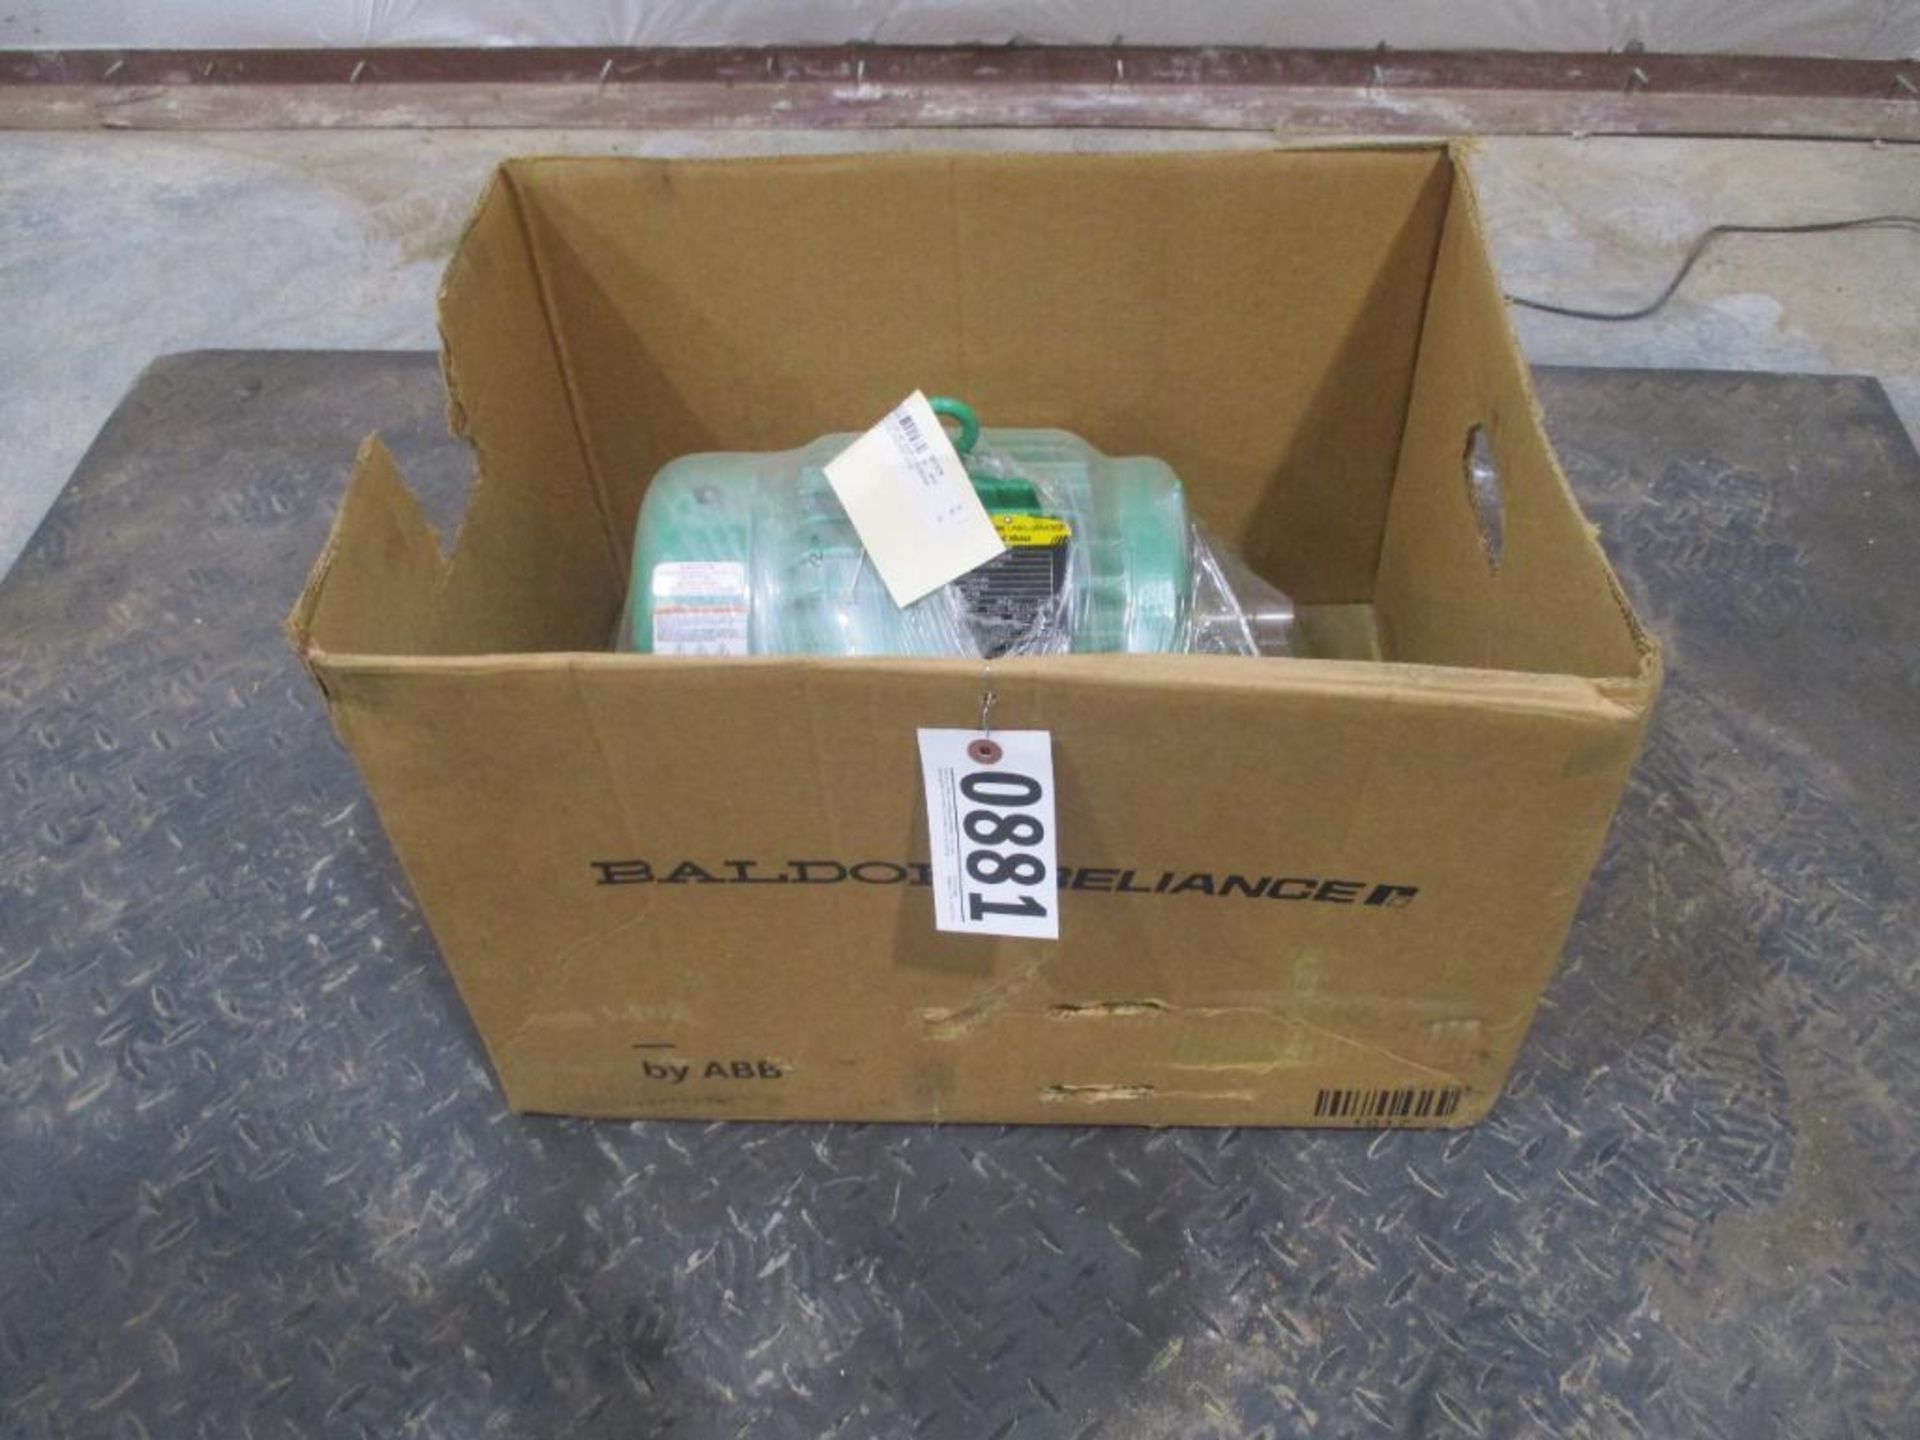 BALDOR 3 PHASE 5HP 1750RPM 184T FRAME A/C MOTOR P/N 1208322167-000010, 105# lbs (There will be a $40